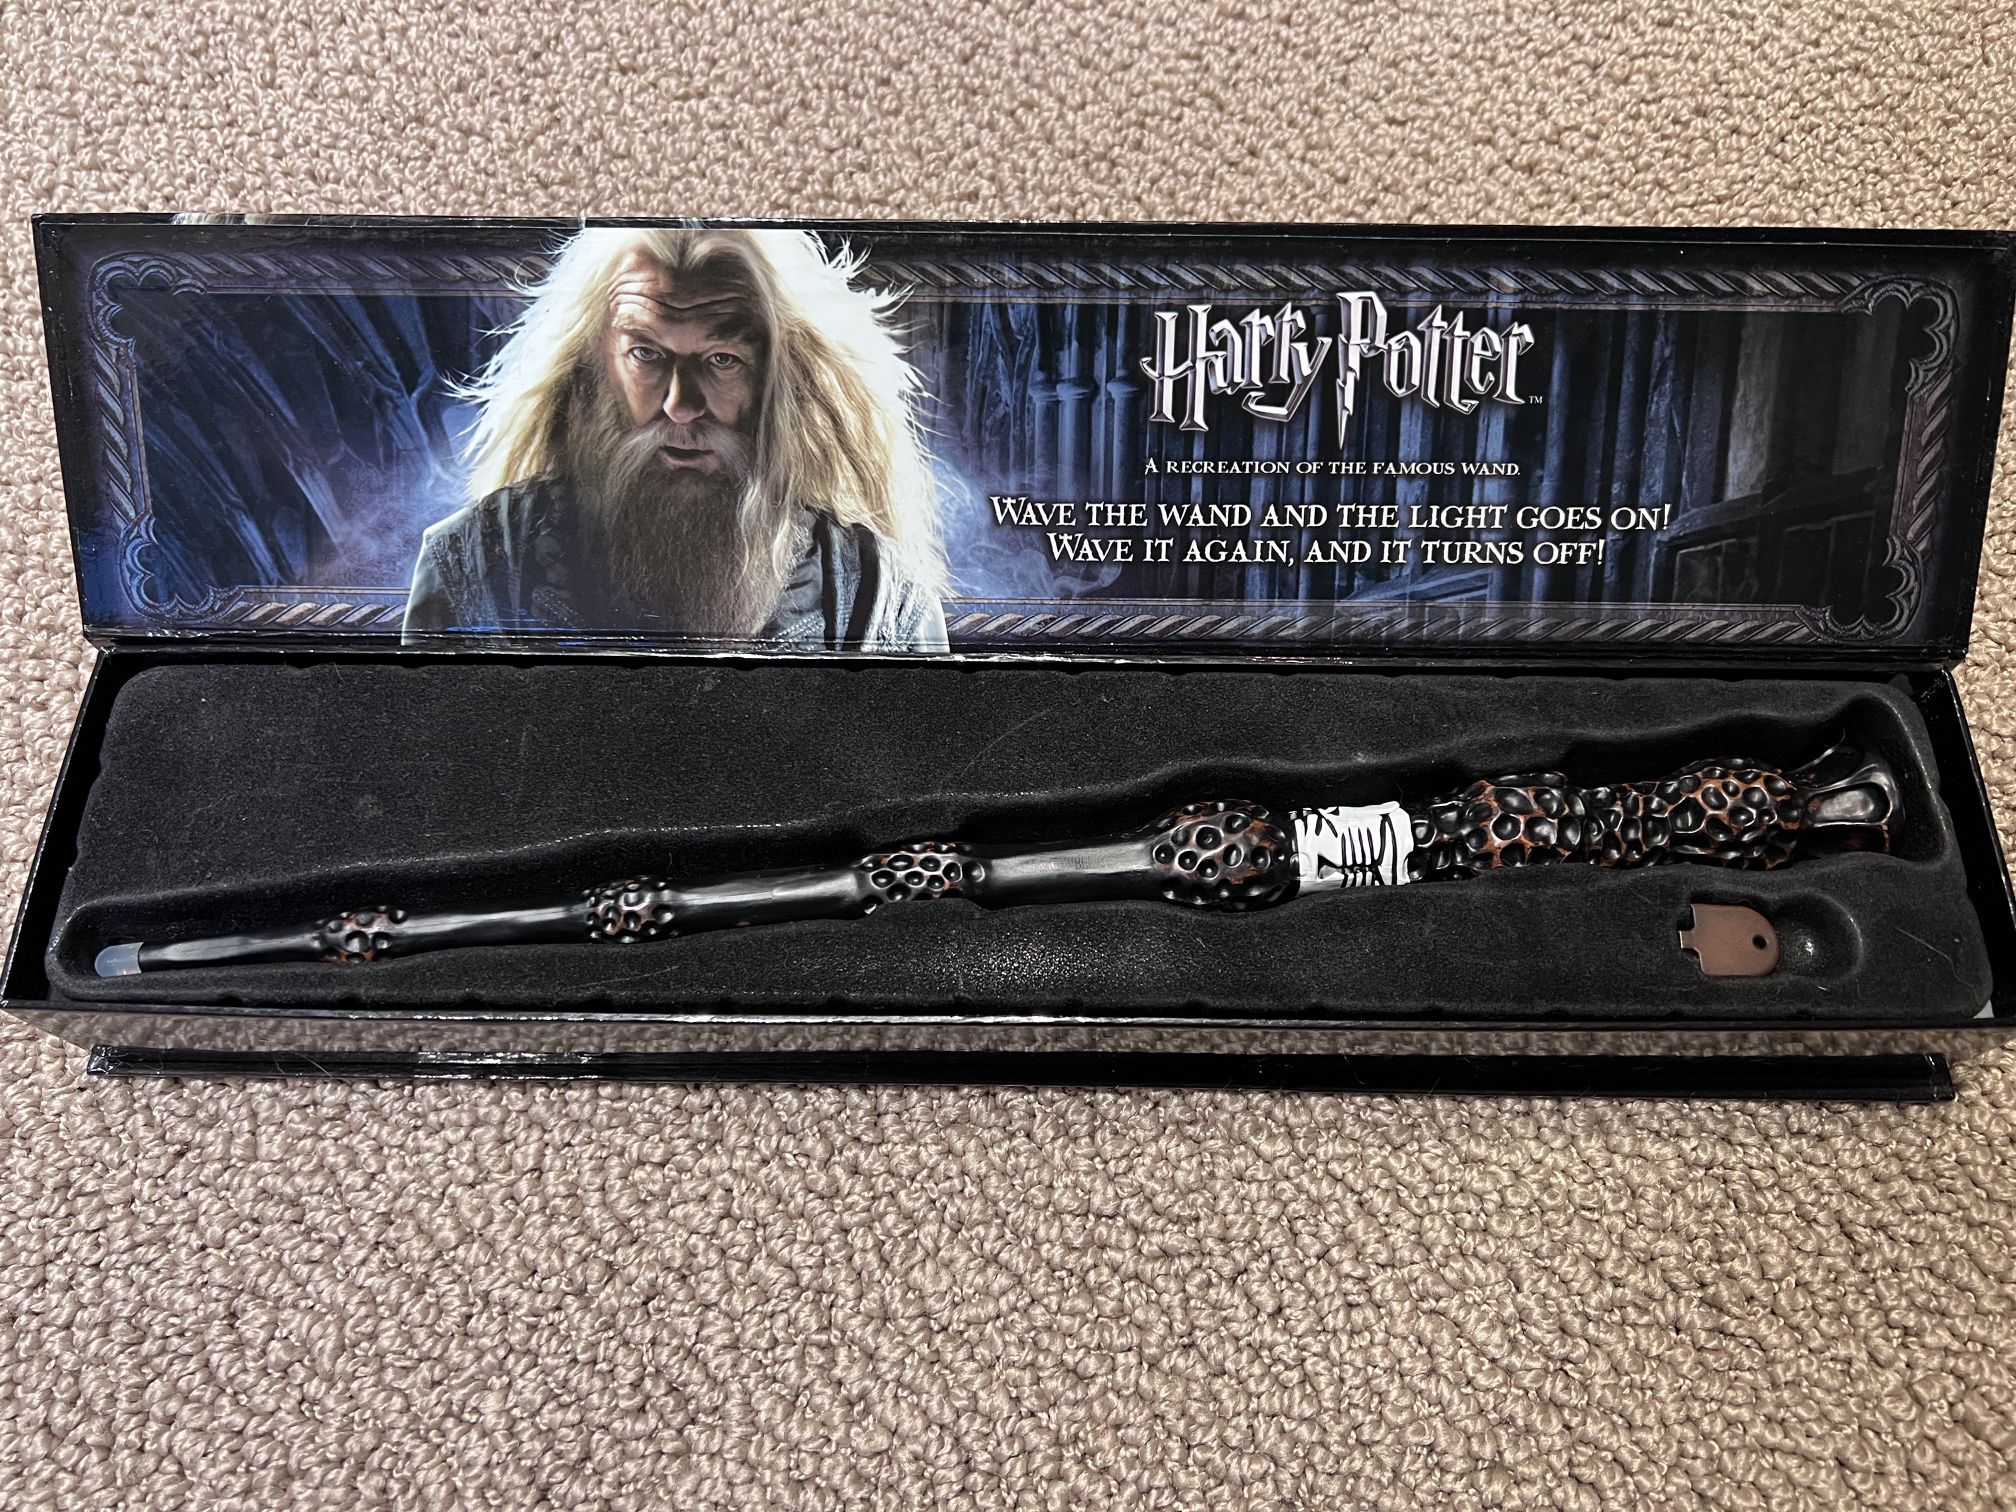 (2) Harry Potter Wand & The Elder Wand with illuminating tip